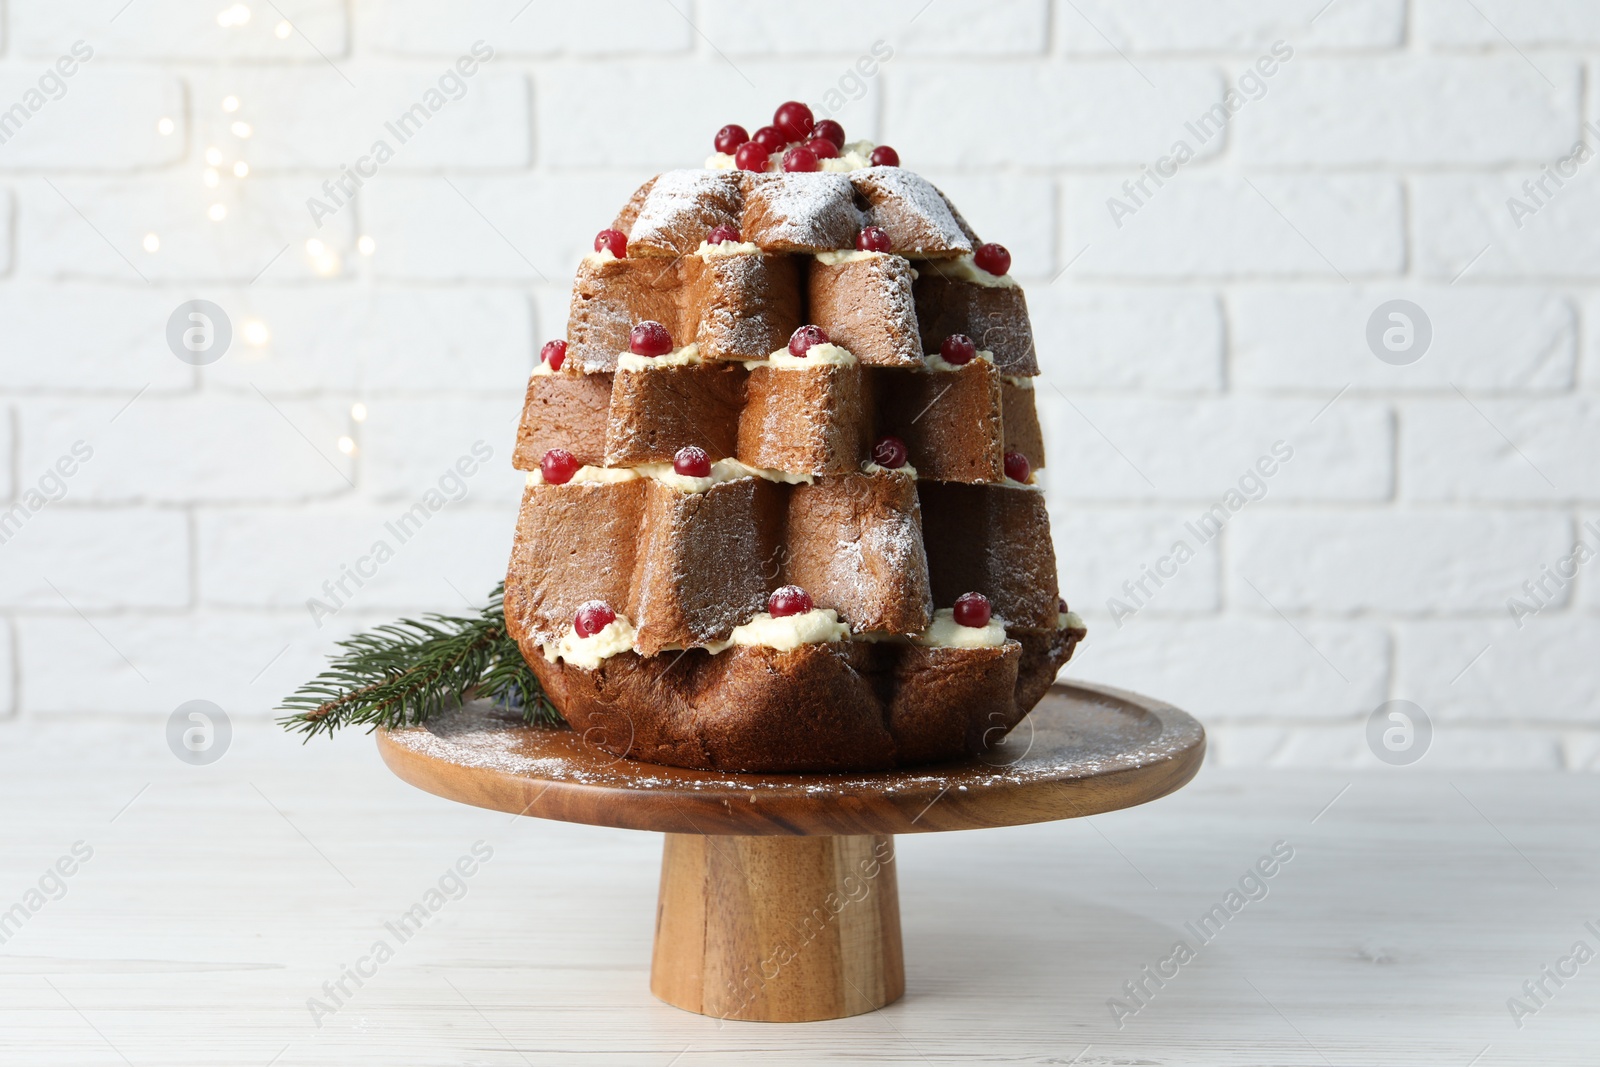 Photo of Delicious Pandoro Christmas tree cake with powdered sugar and berries on white table near brick wall